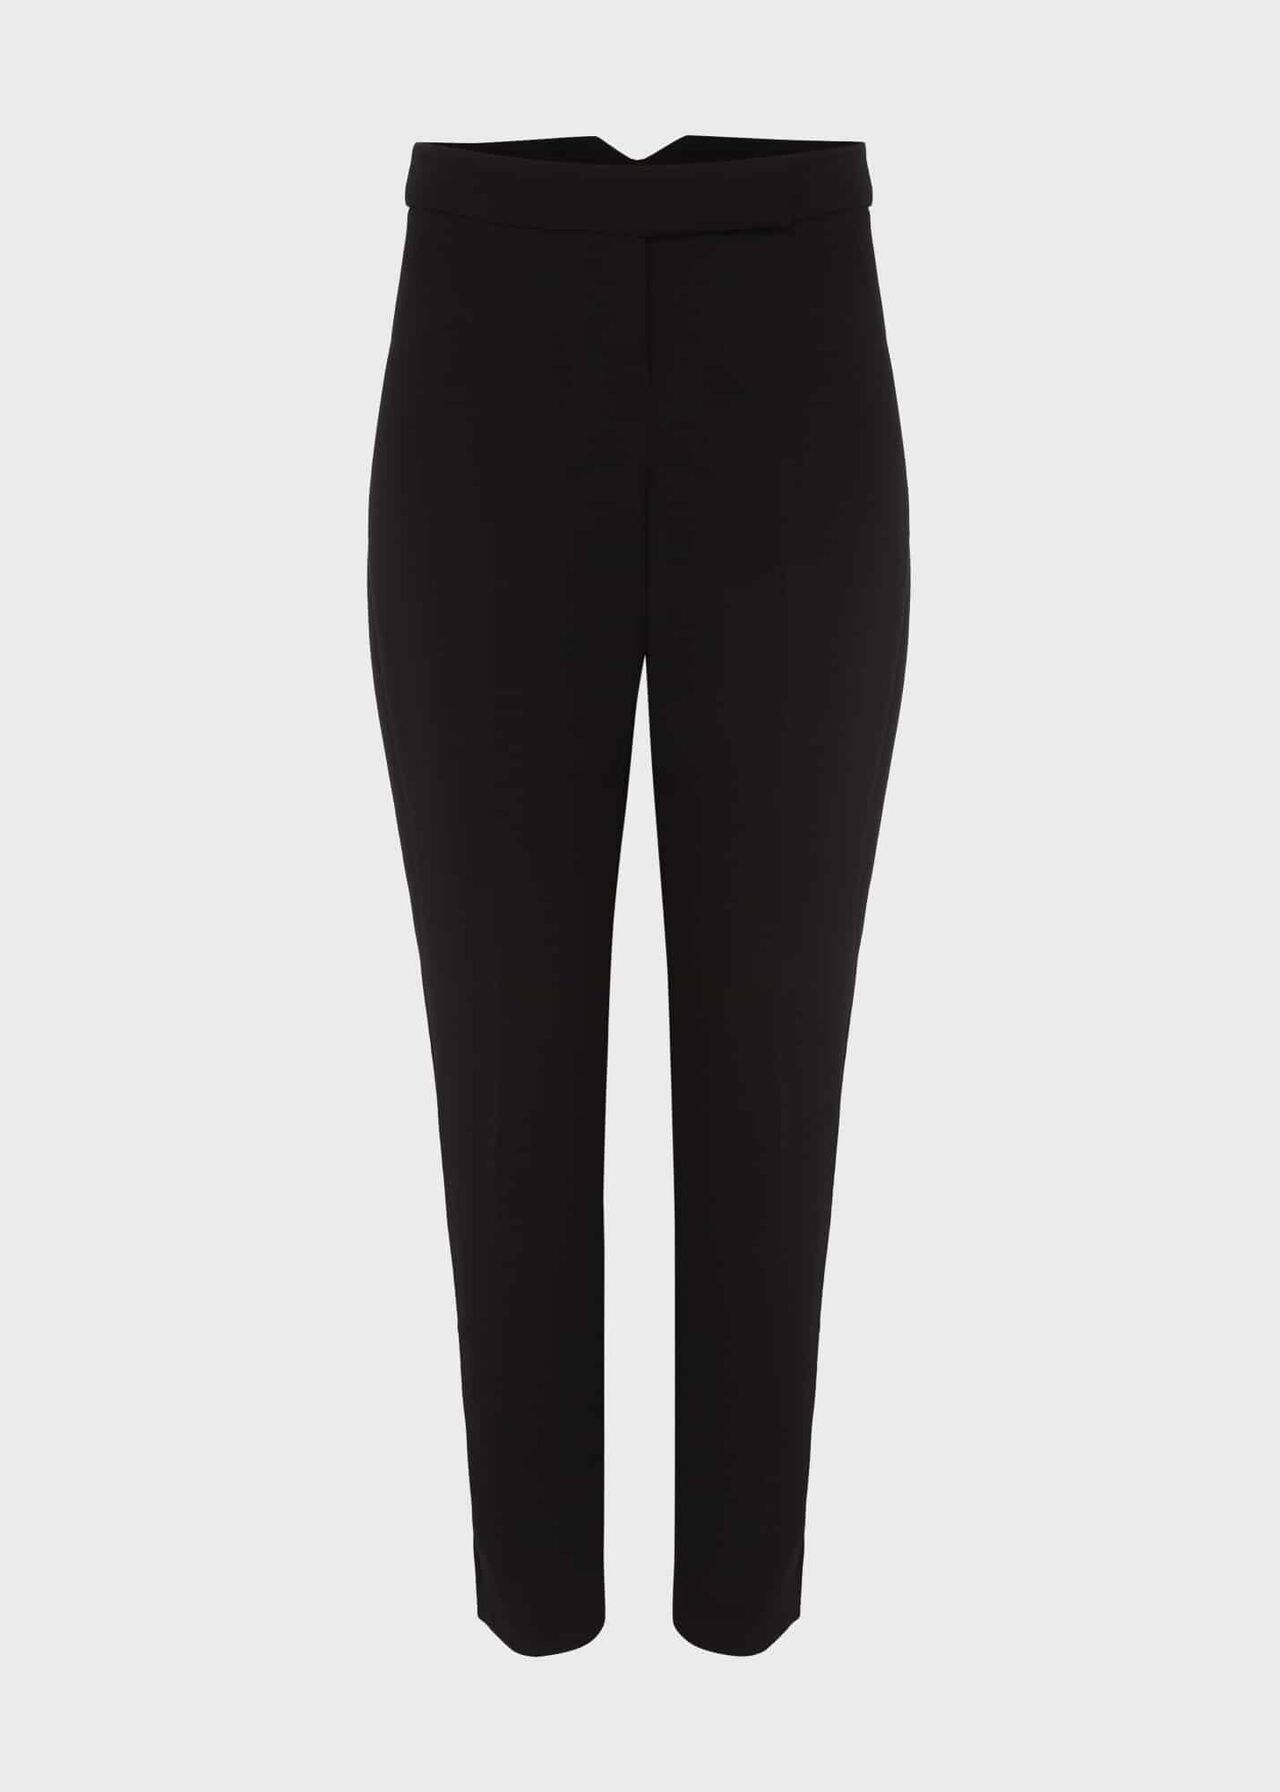 Petite Ophelia Slim Trousers With Stretch, Black, hi-res